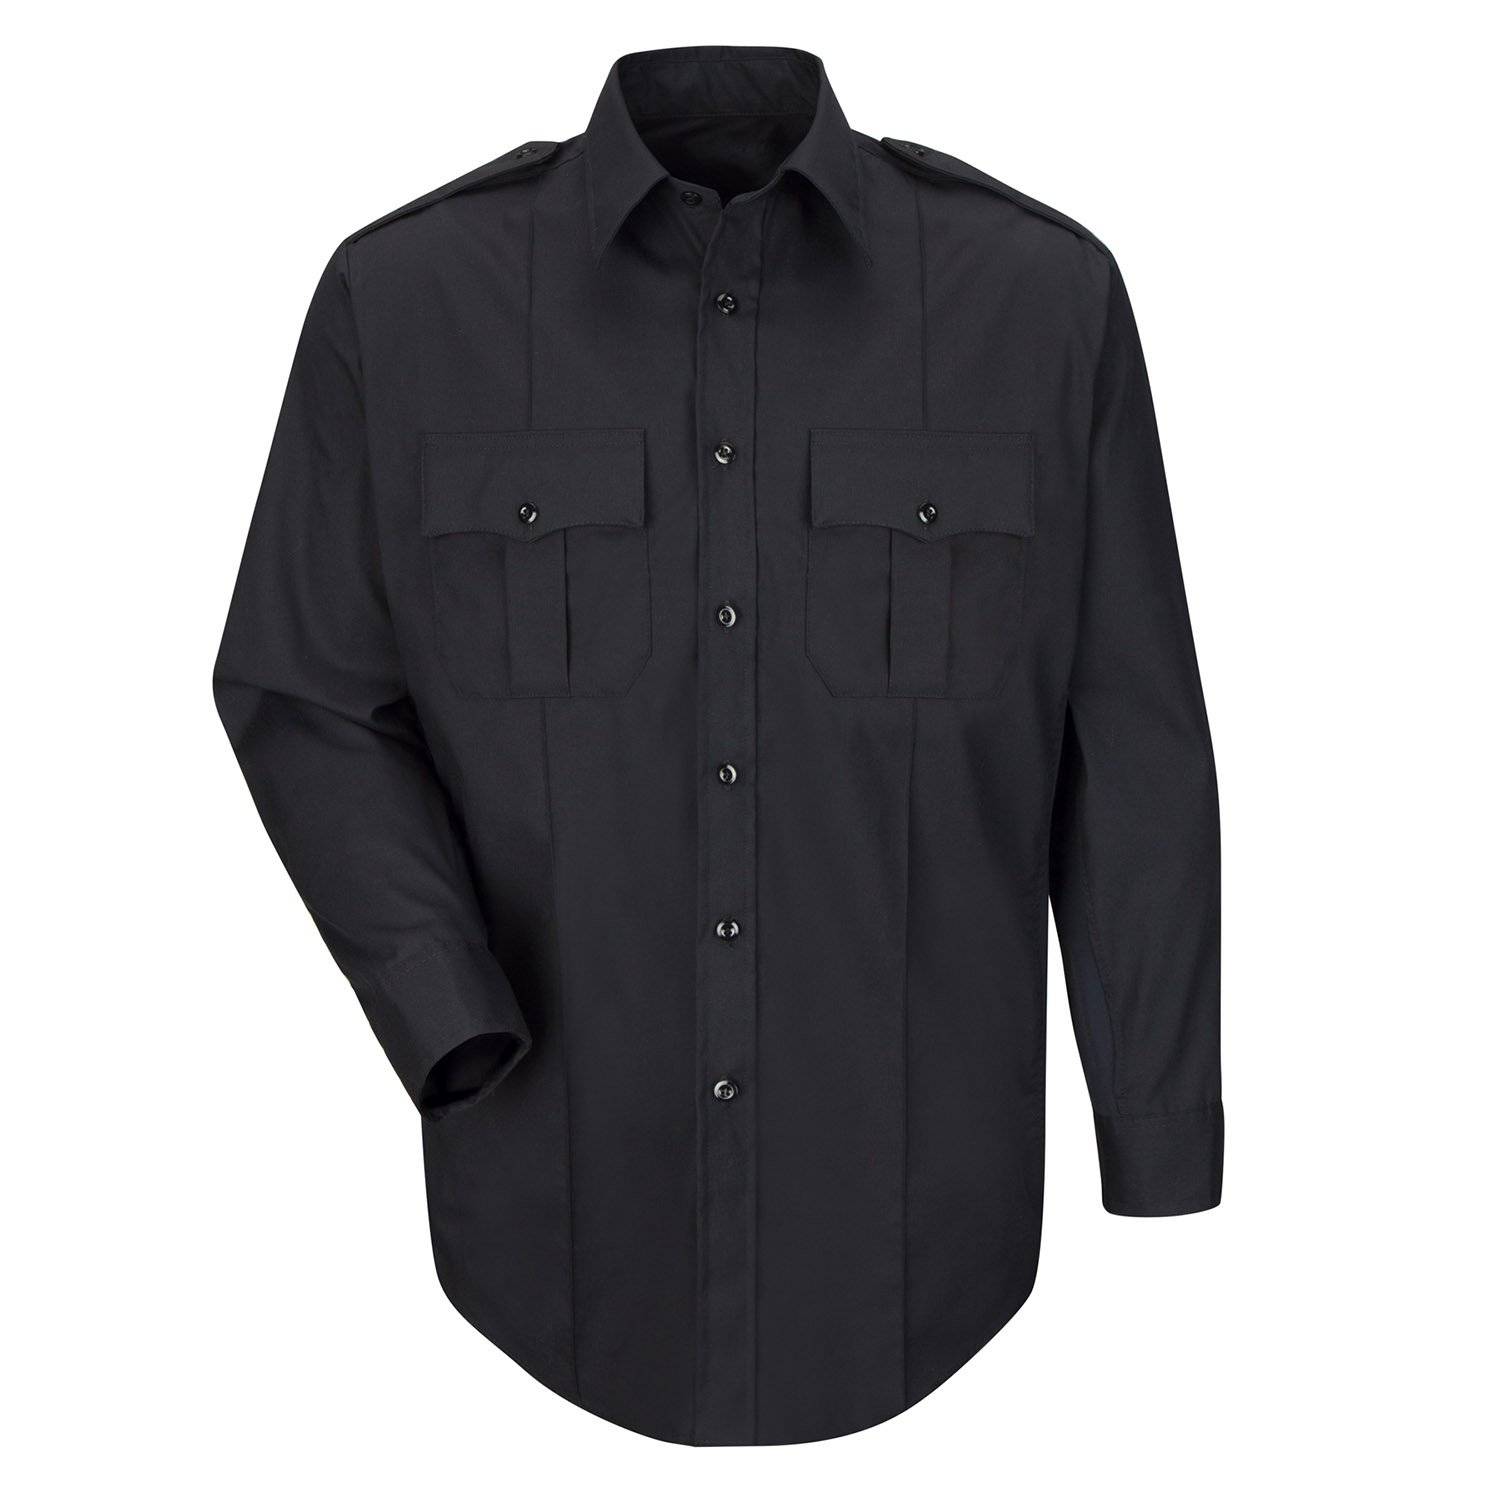 HORACE SMALL NEW DIMENSION PLUS MEN'S LONG SLEEVE SHIRT